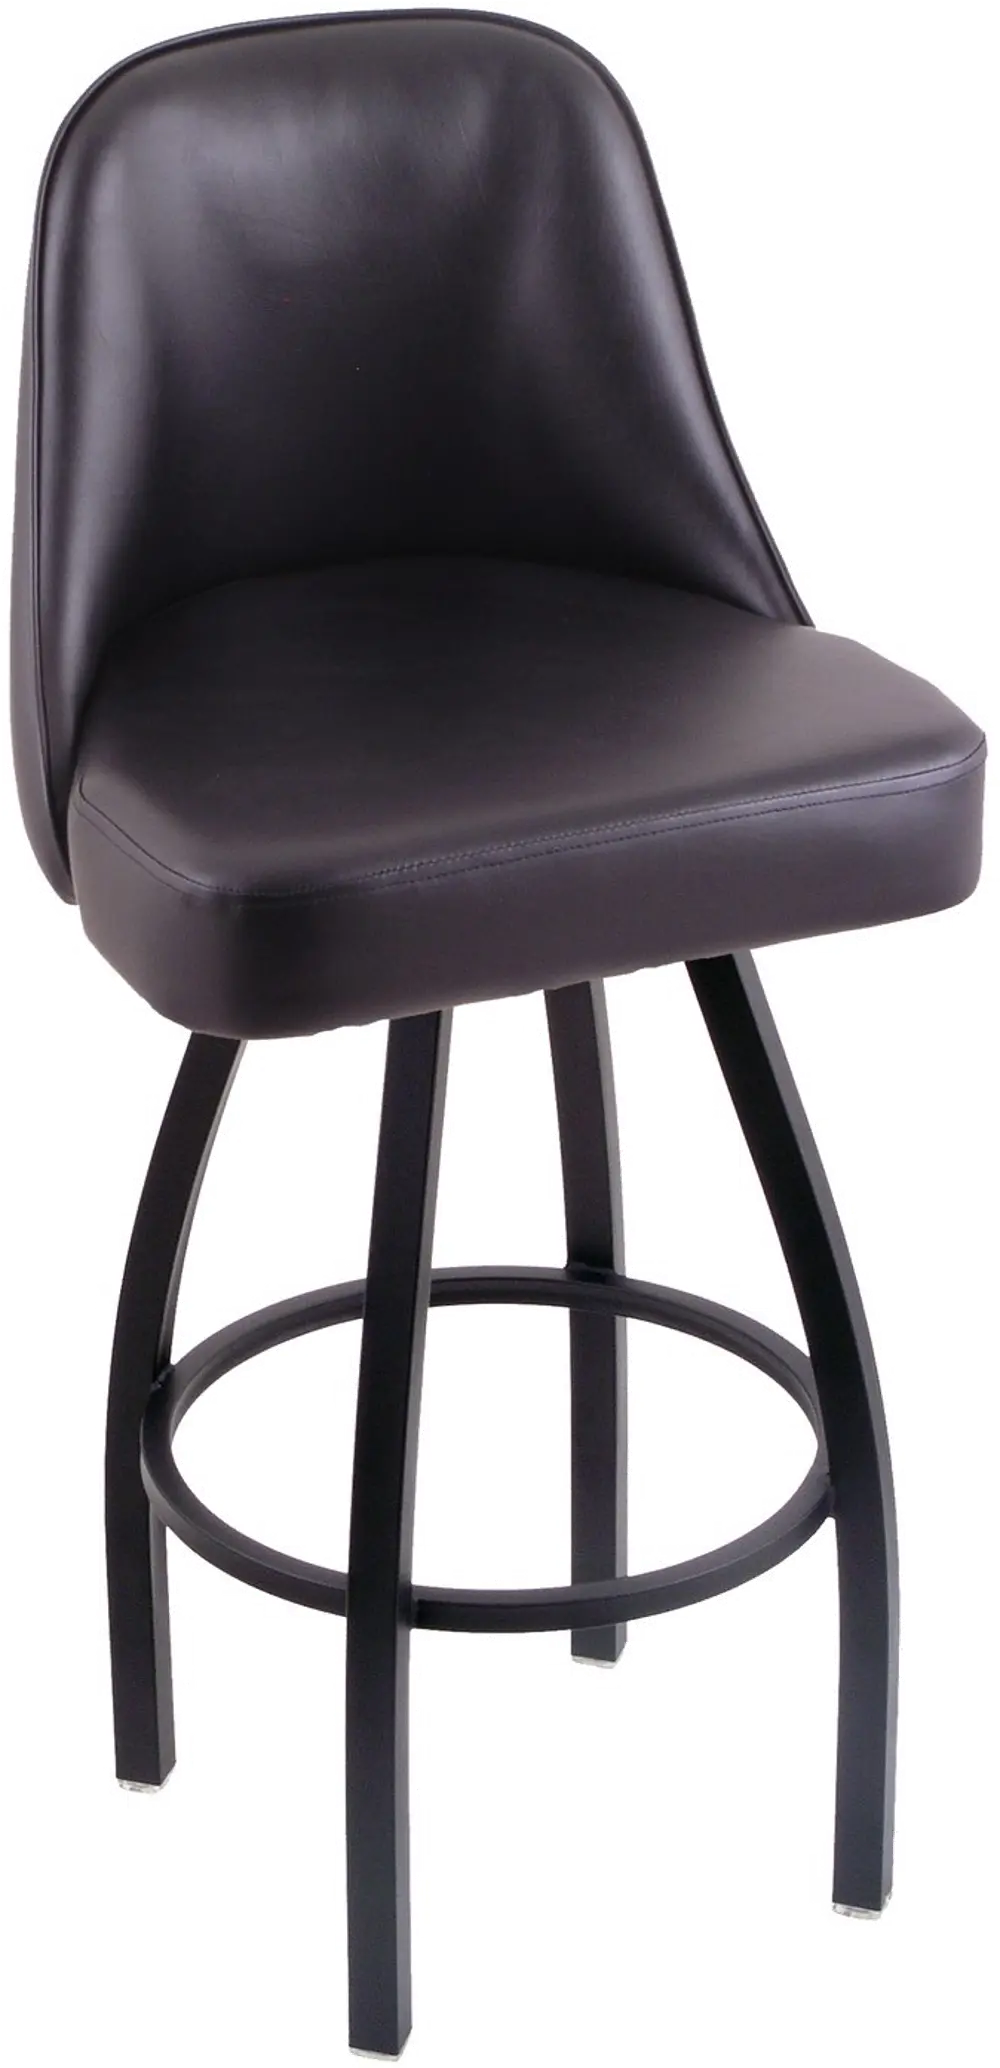 Grizzly Black Metal Upholstered Swivel Extra Tall Bar Stool-1